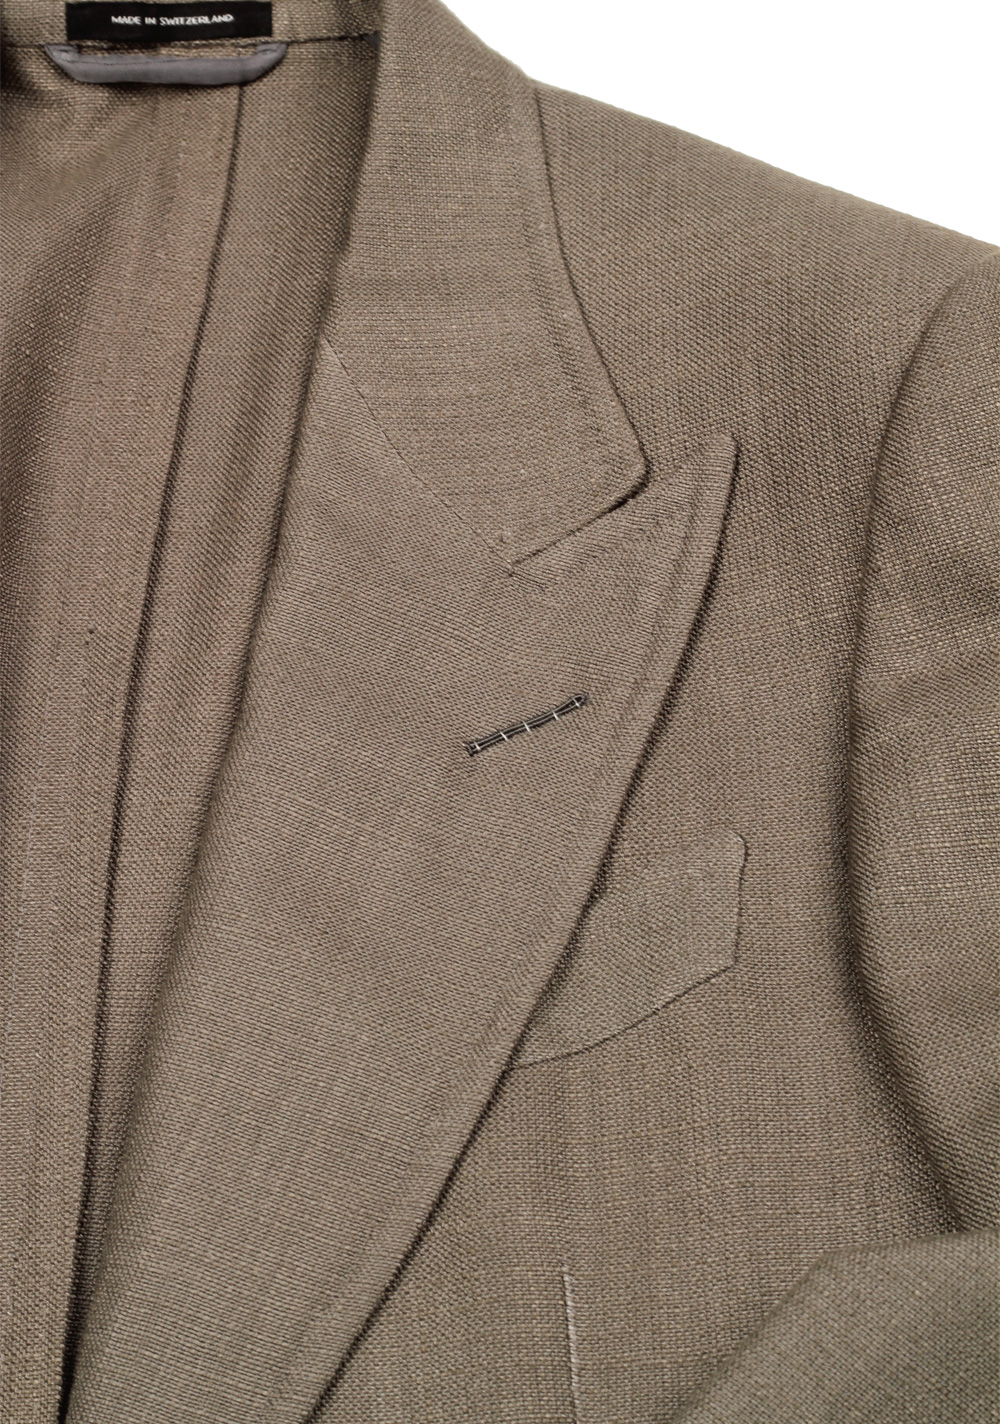 TOM FORD Shelton Greenish Gray Suit Size 46 / 36R U.S. In Rayon | Costume Limité